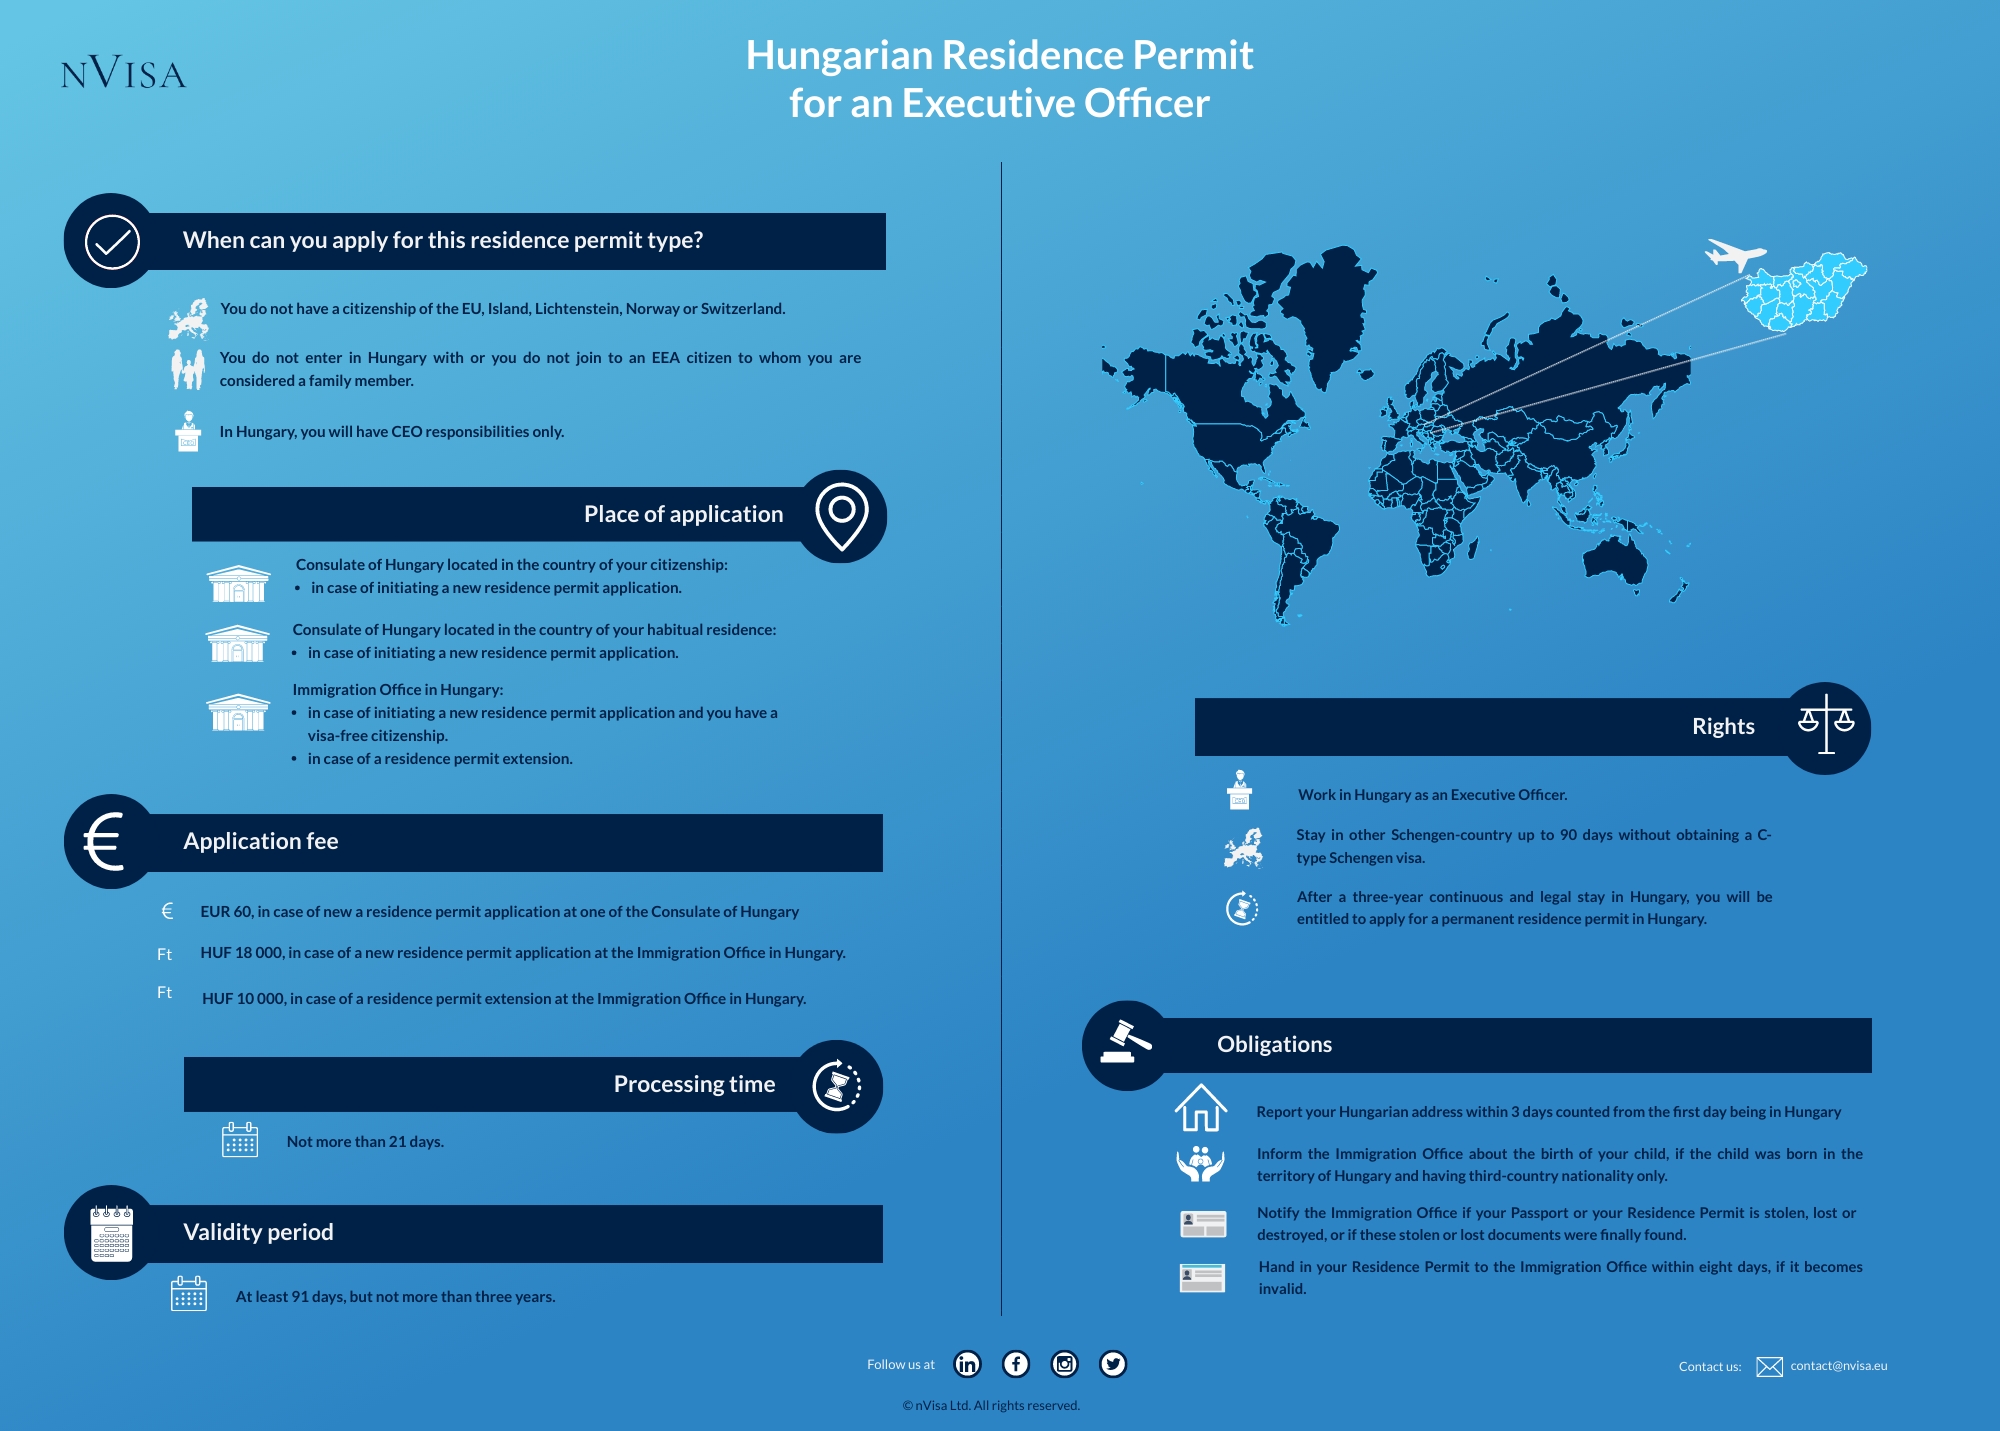 Infographic about immigration requirements for a CEO and the details about obtaining a residence permit